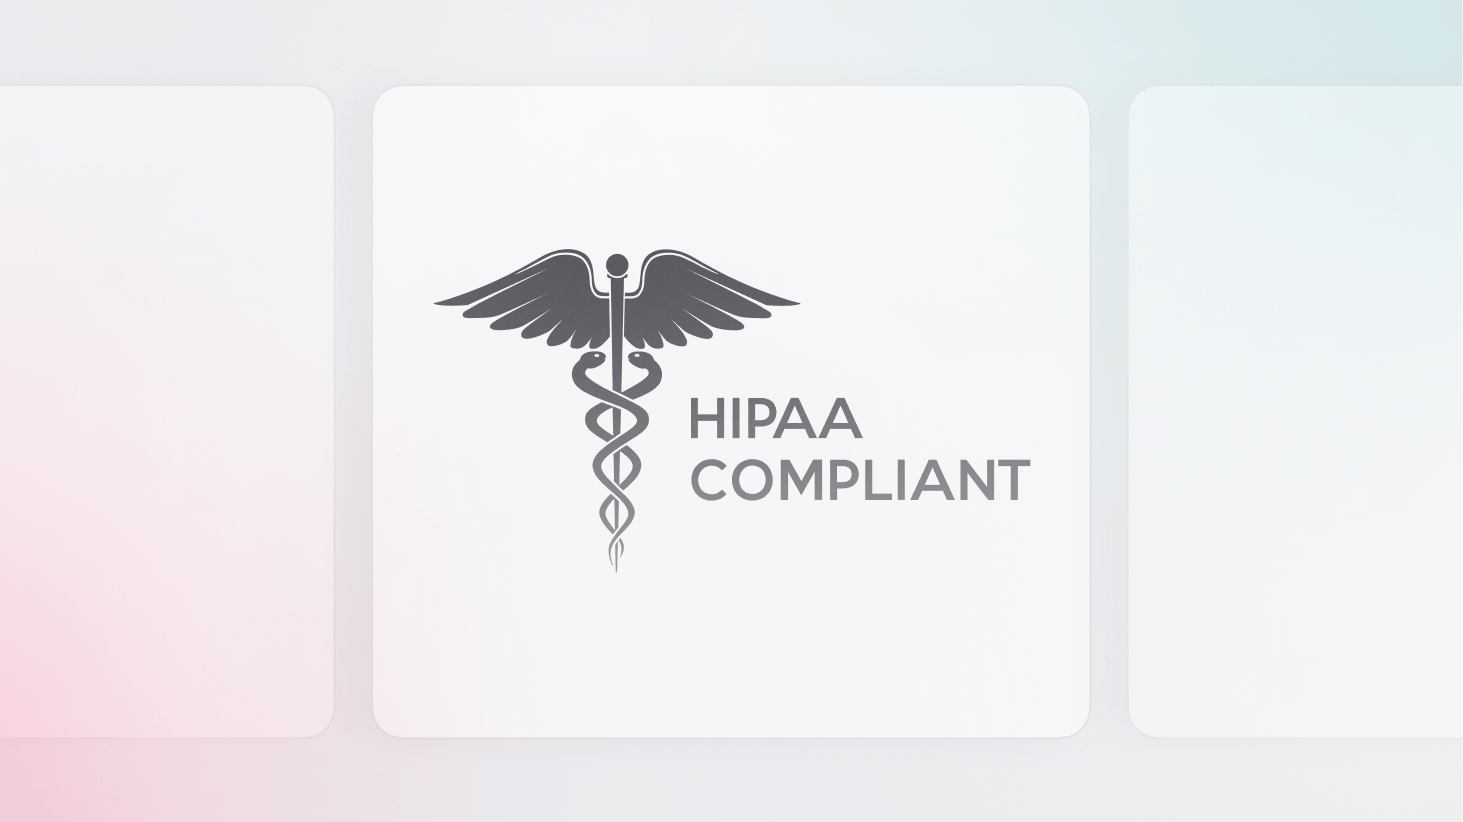 Appwrite is now HIPAA compliant